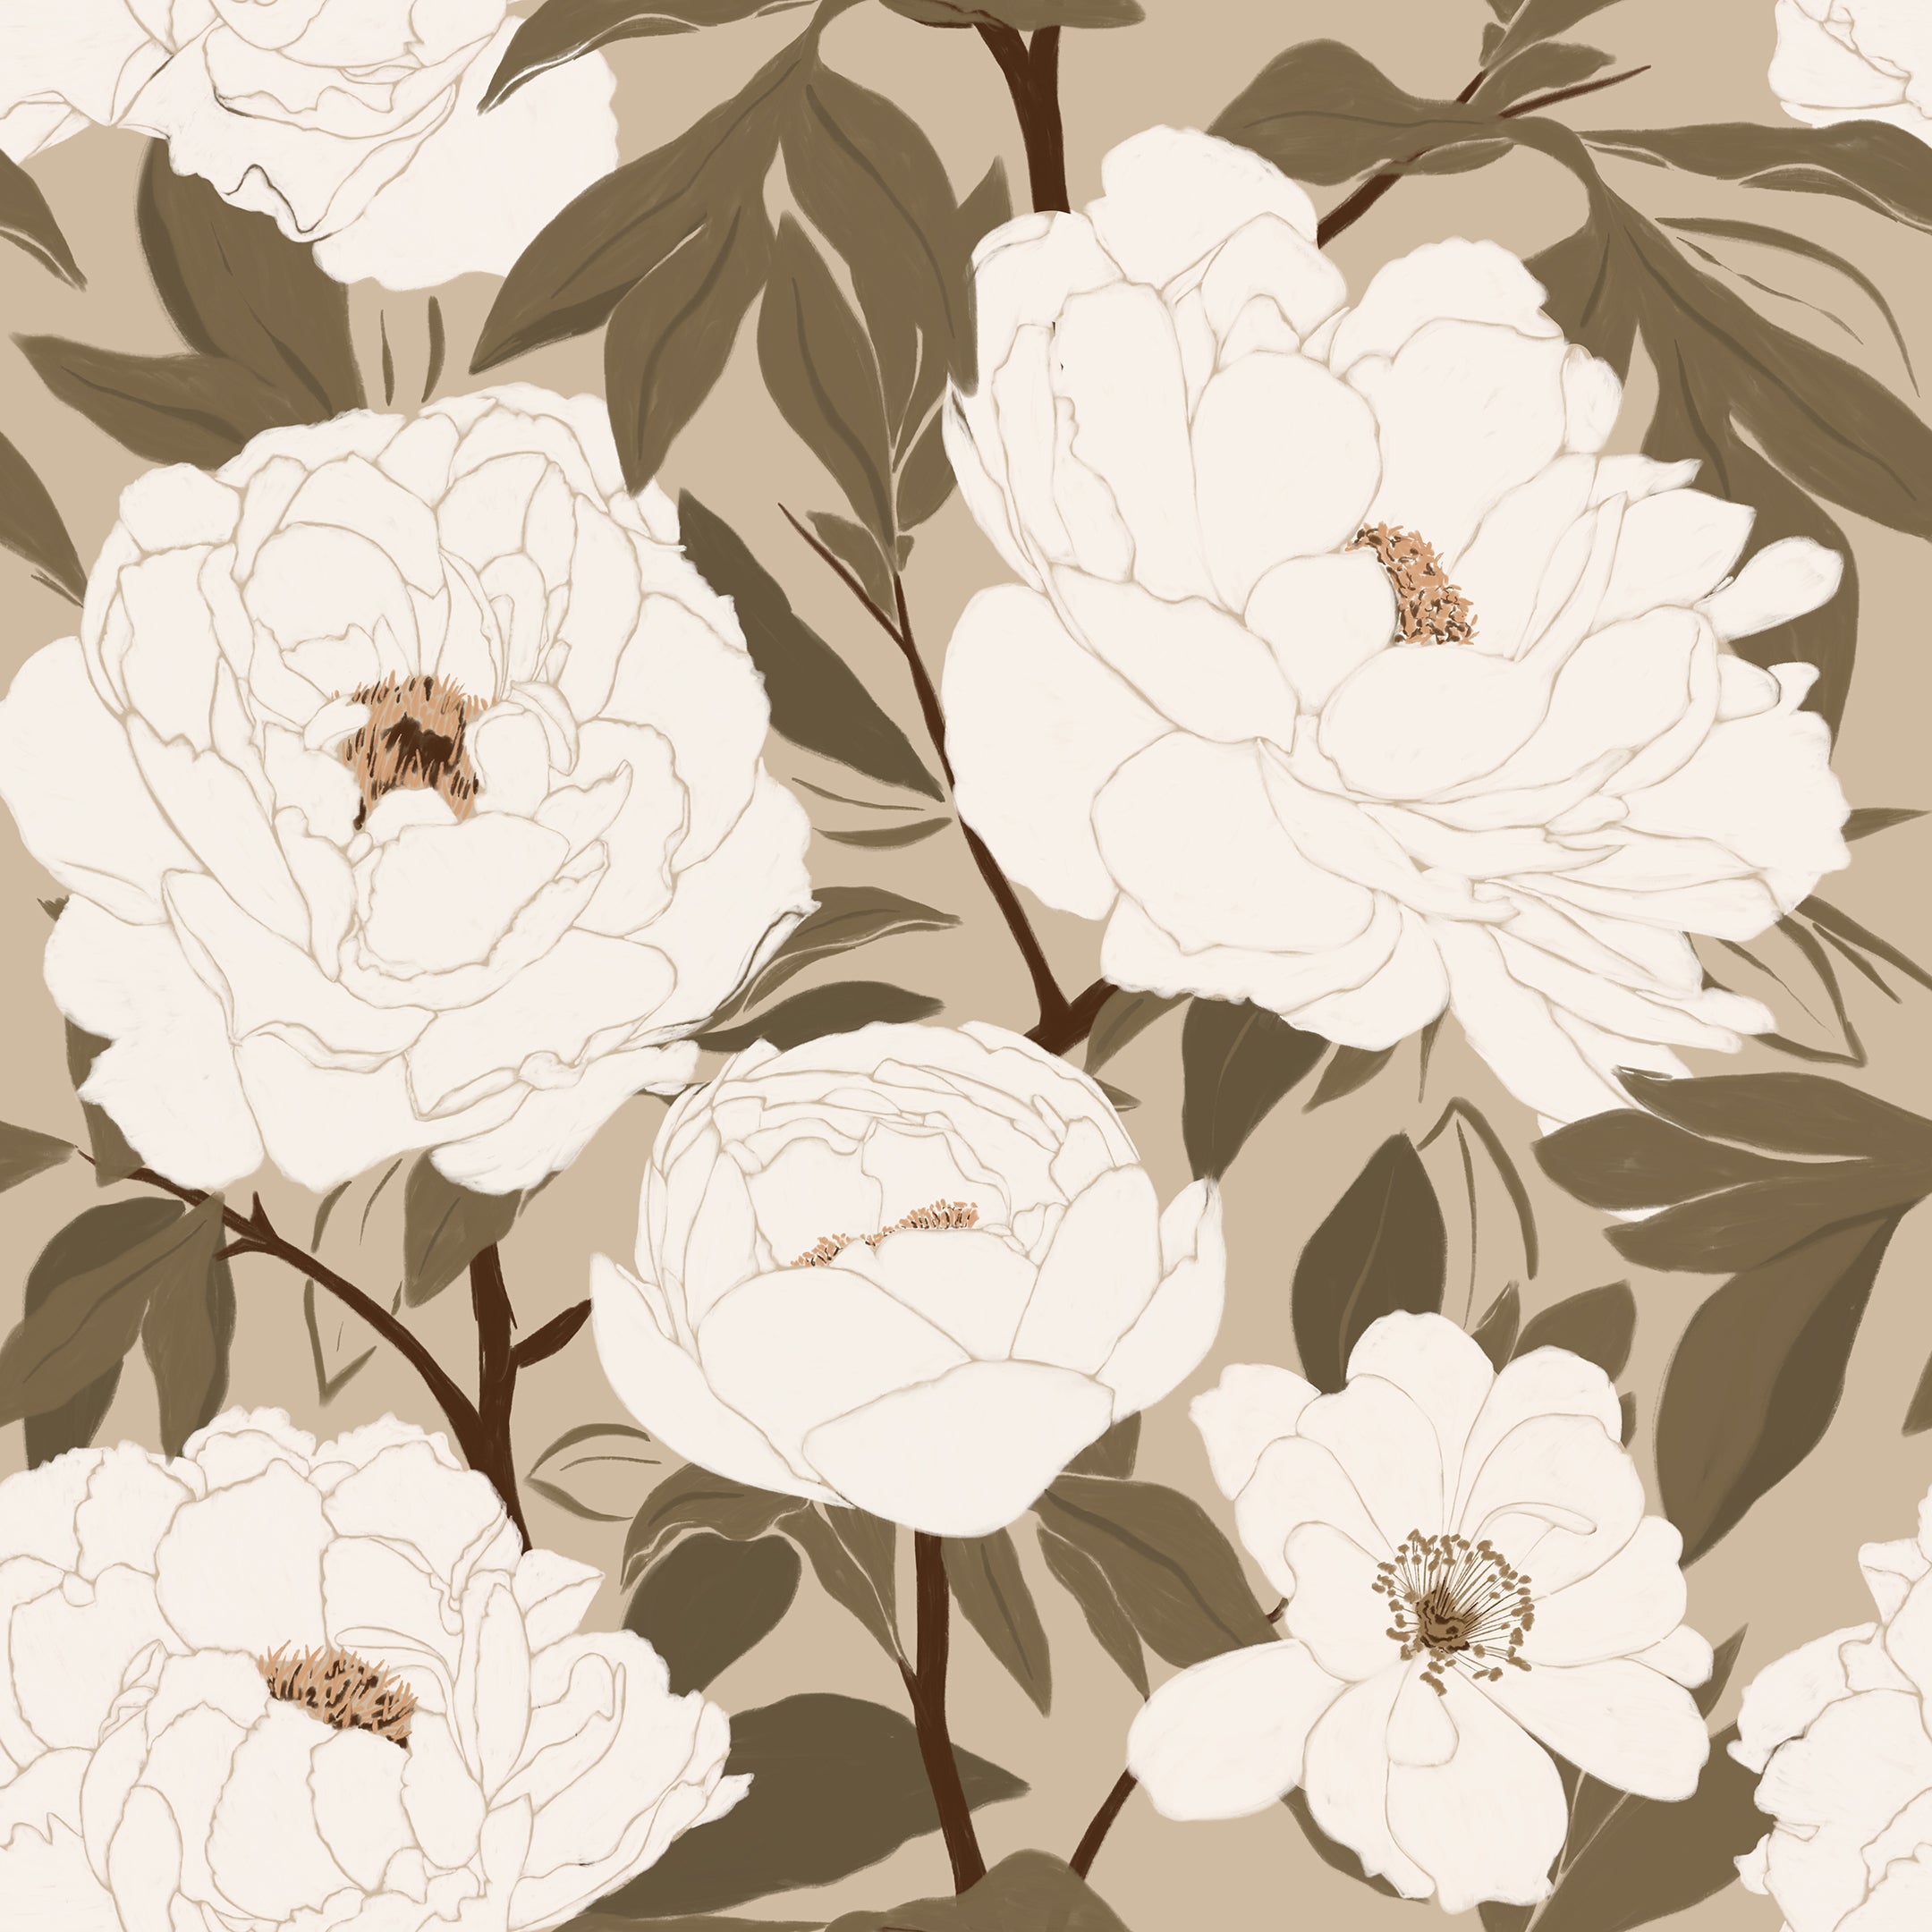 Close-up view of the White Peony Wallpaper featuring large, detailed white peony flowers with lush green leaves on a soft beige background. The elegant design and intricate details add a touch of sophistication and nature-inspired beauty.